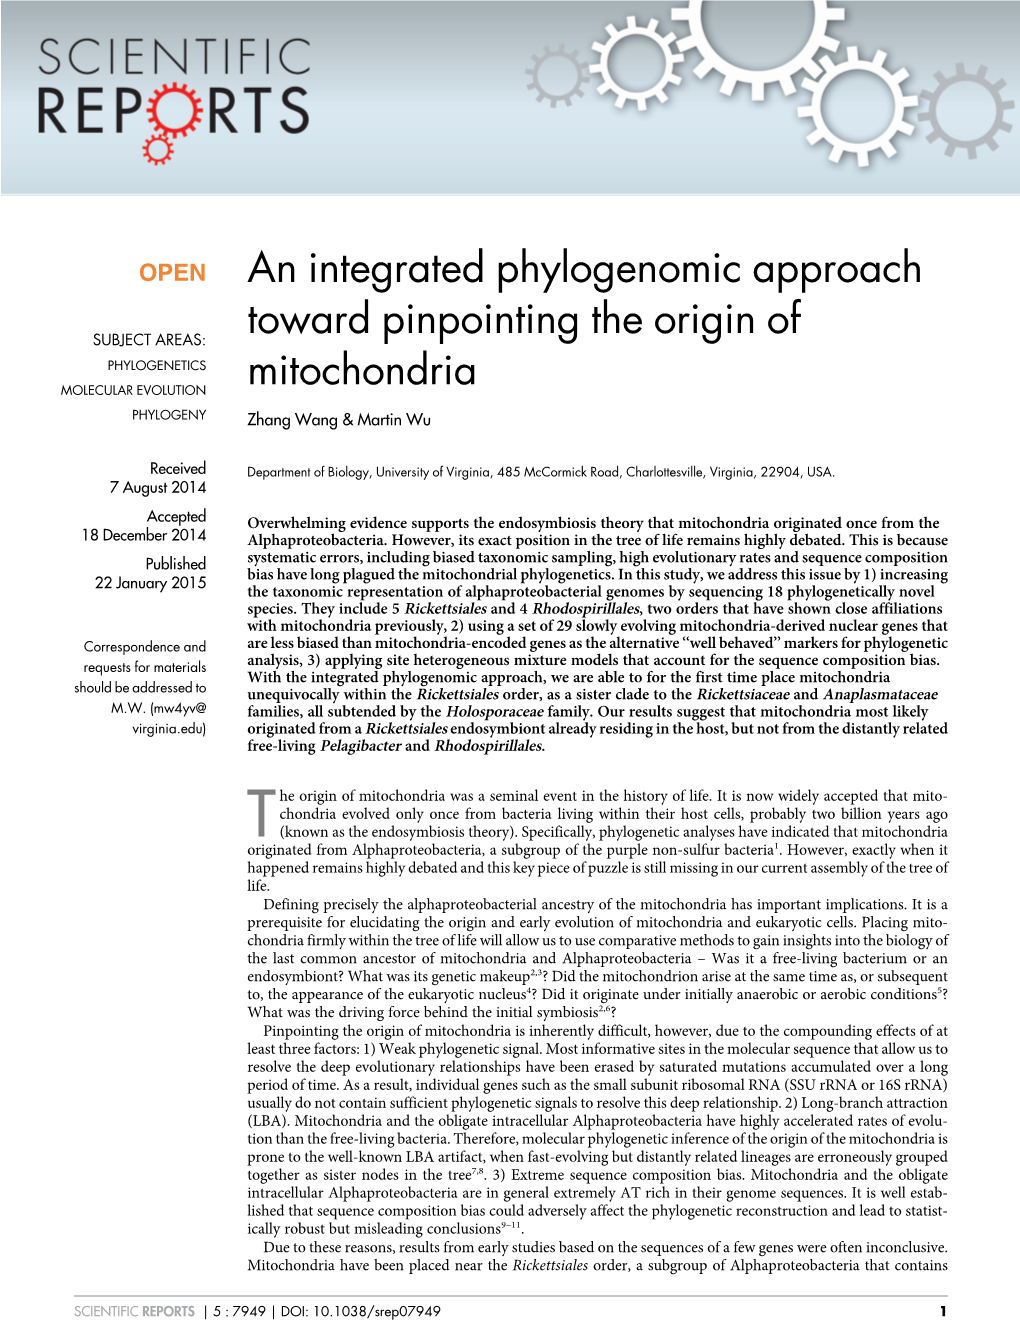 An Integrated Phylogenomic Approach Toward Pinpointing the Origin Of